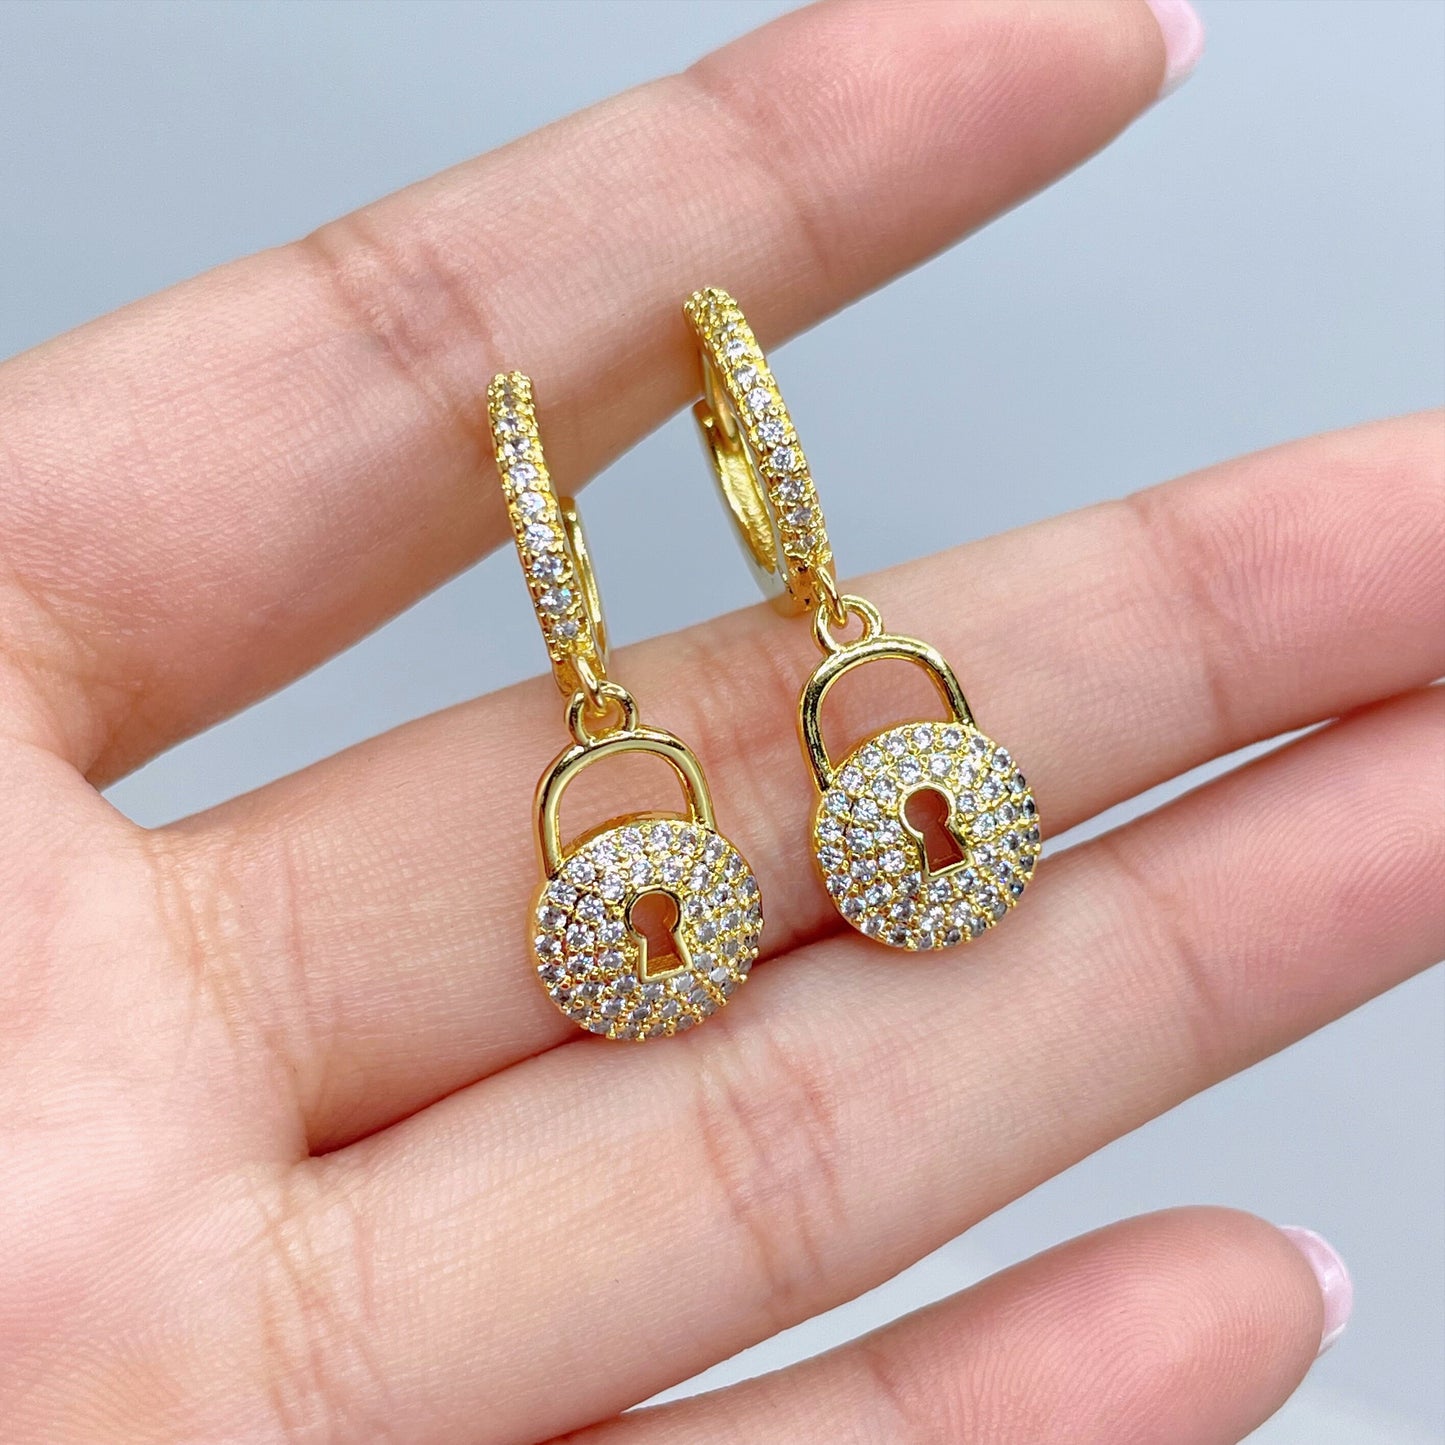 18k Gold Filled 15mm Huggie Earrings with Micro Cubic Zirconia Circle Lock Shape Charm, Dangle Earrings, Wholesale Jewelry Making Supplies